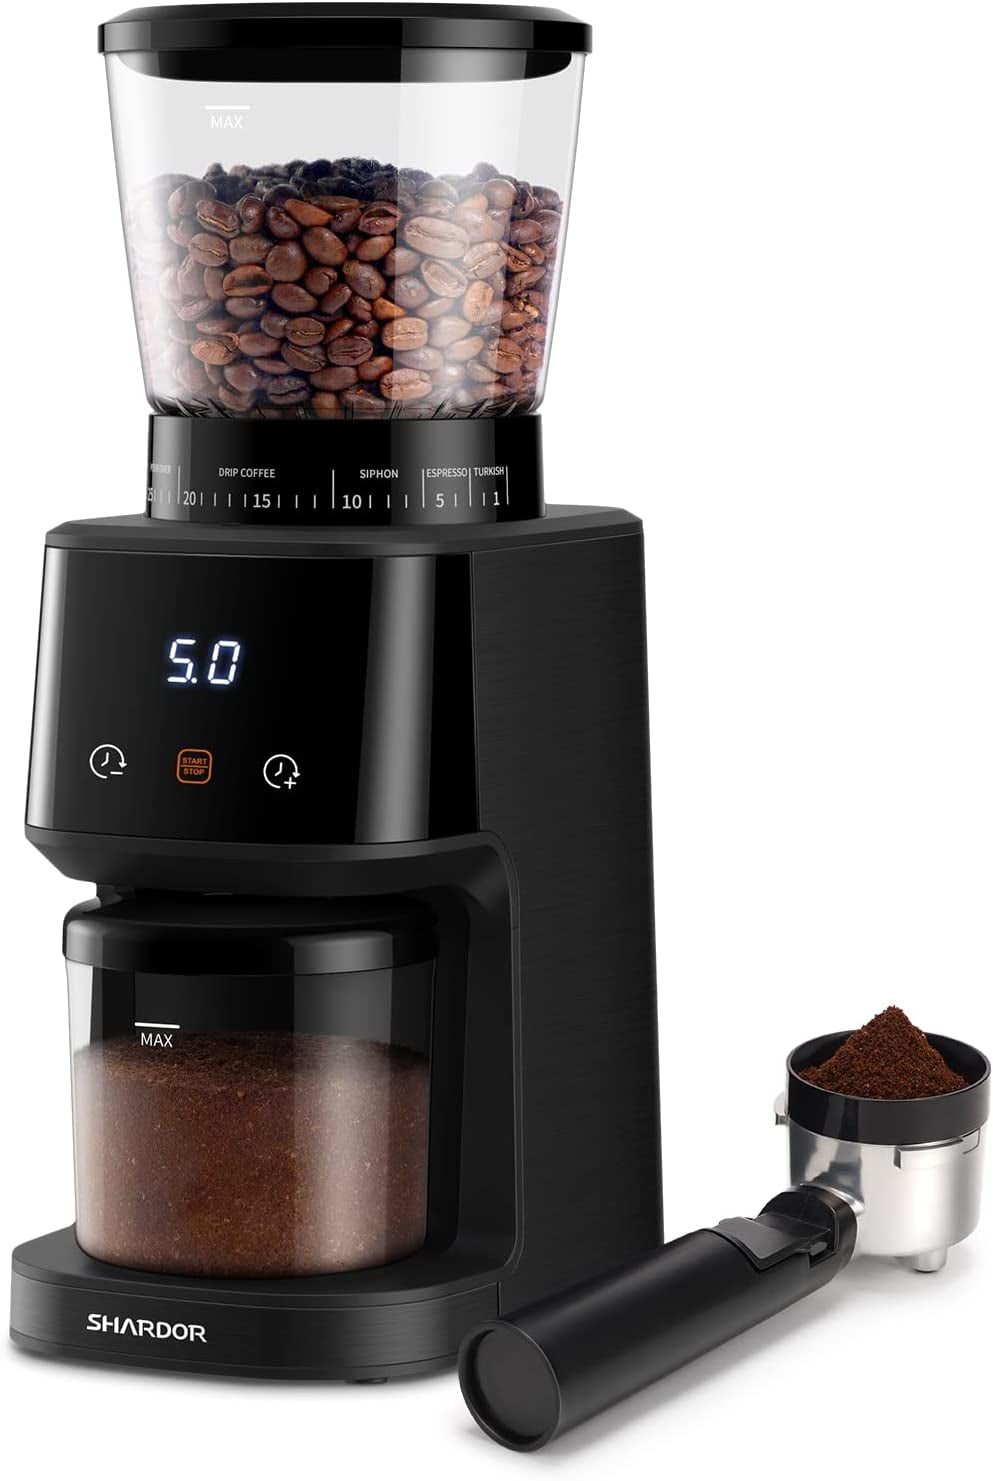  TWOMEOW Conical Burr Coffee Grinder, Stainless Steel Coffee  Grinder Electric with 15 Precise Grind Settings for Espresso/Pour Over/Moka  Pot/French Press/Cold Brew, Compact Design : Home & Kitchen